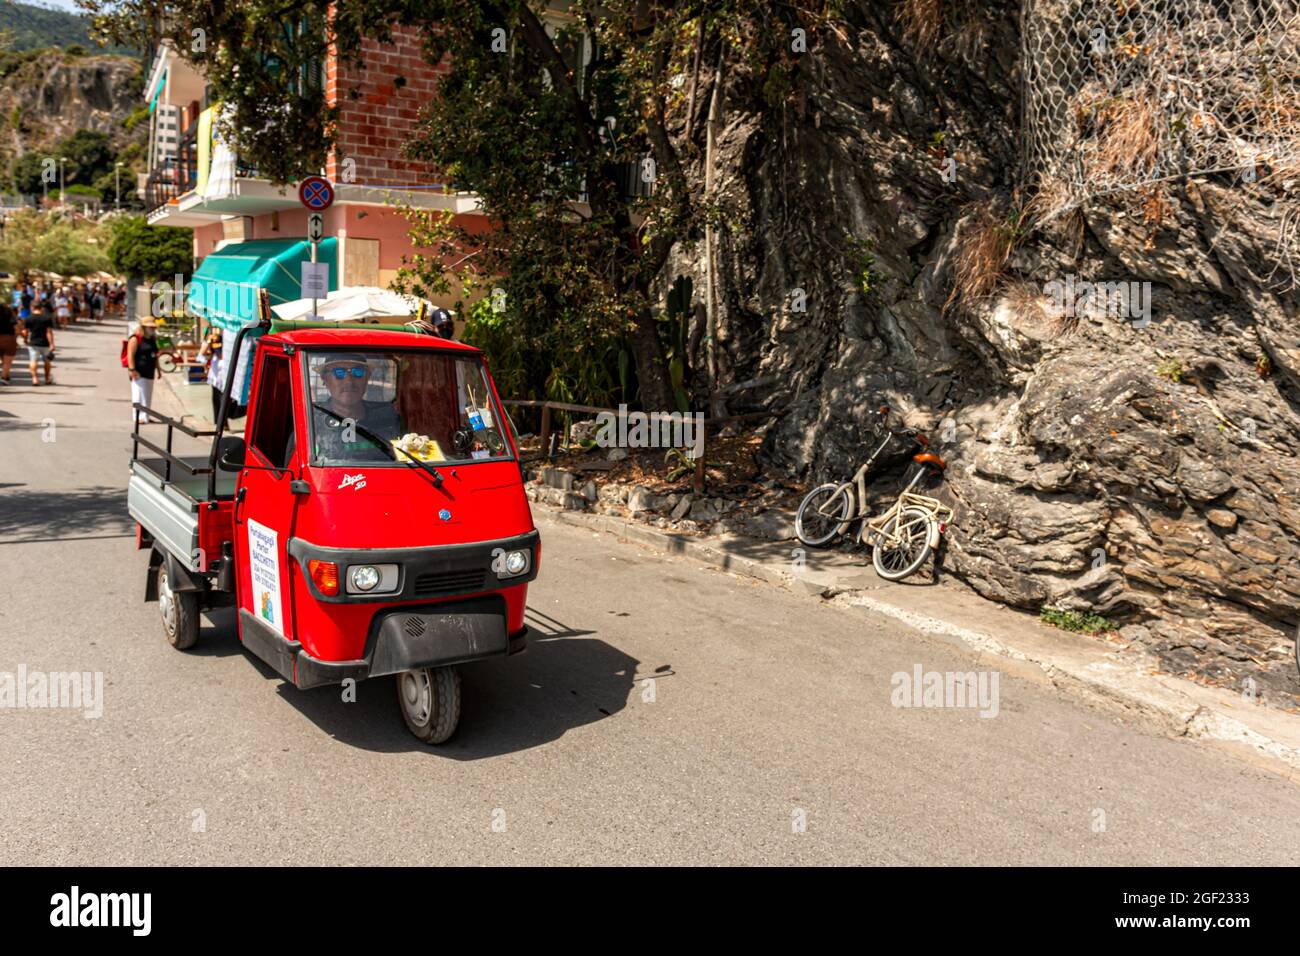 Monterosso, Italy - August 10, 2021: Piaggio Ape, a traditional three wheels car used for transportings stuffs Stock Photo